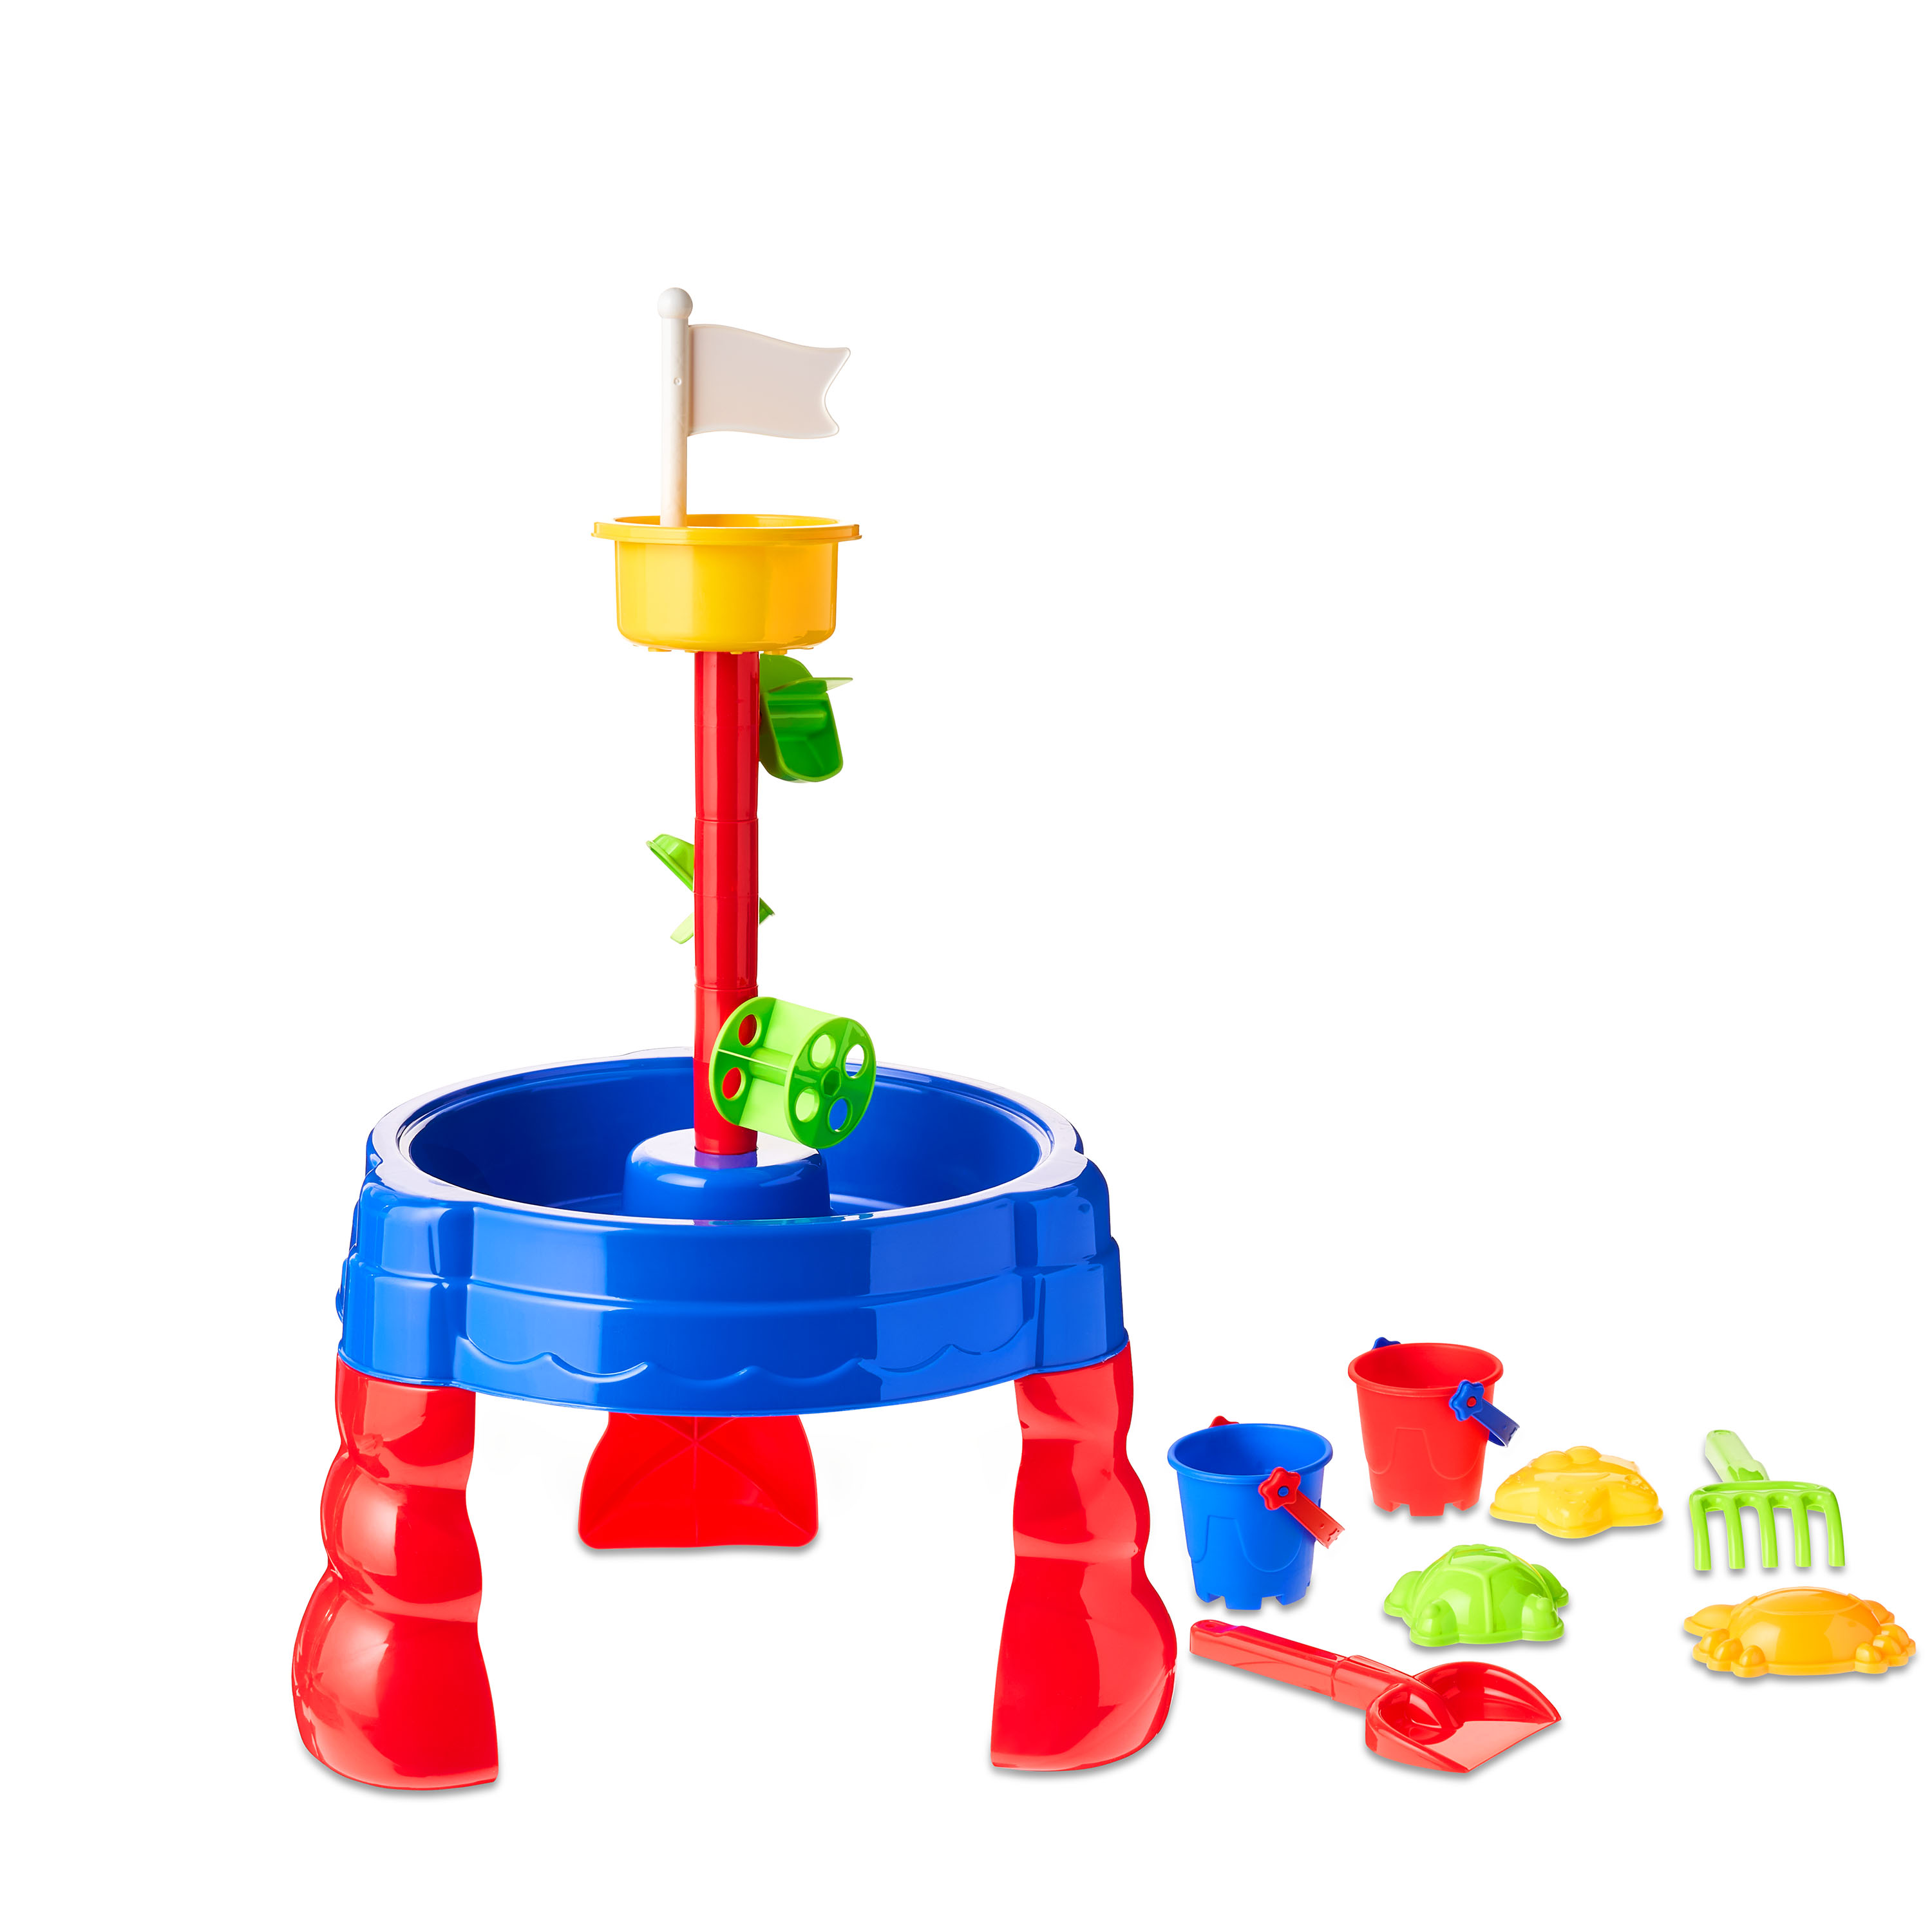 Play Day Sand & Water Table - Creative Toy for Children Ages 3+ - image 1 of 5